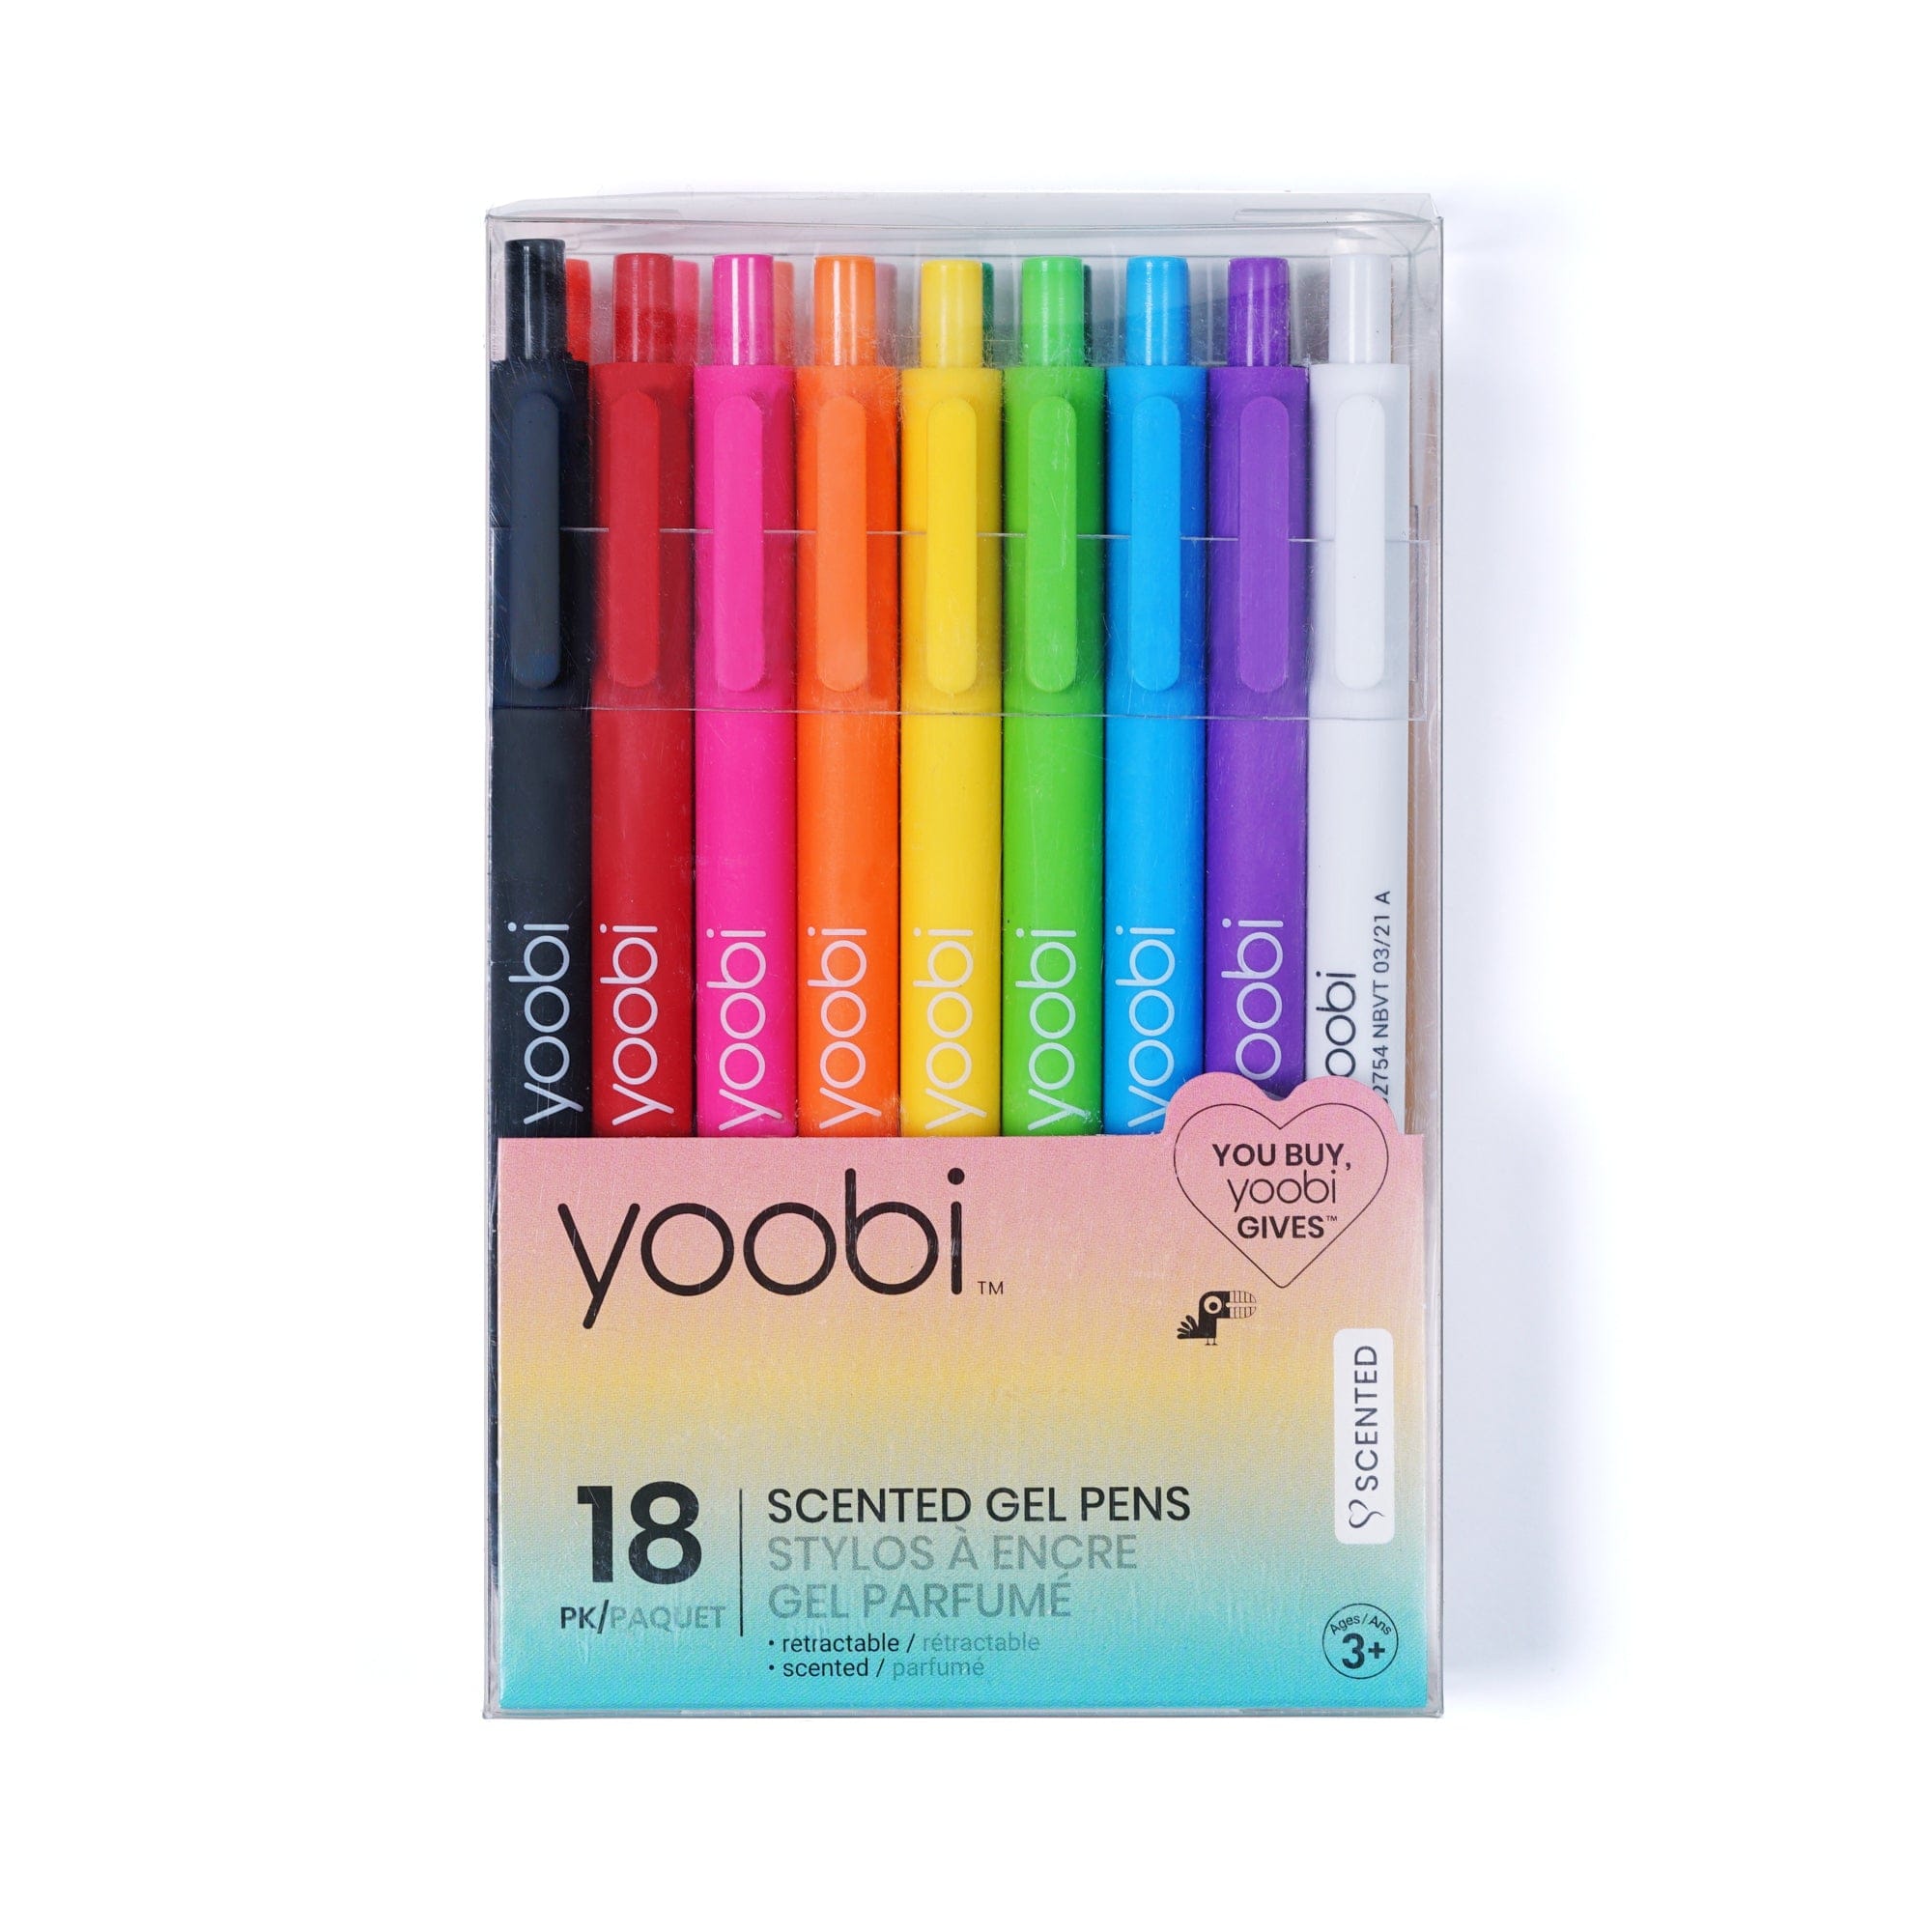 Wholesale Japanese Glitter Yoobi Scented Gel Pens Set For Adult Coloring  Books, Journals, Drawing, Doodling, And Kawaii School Supplies From  Damofang, $16.1